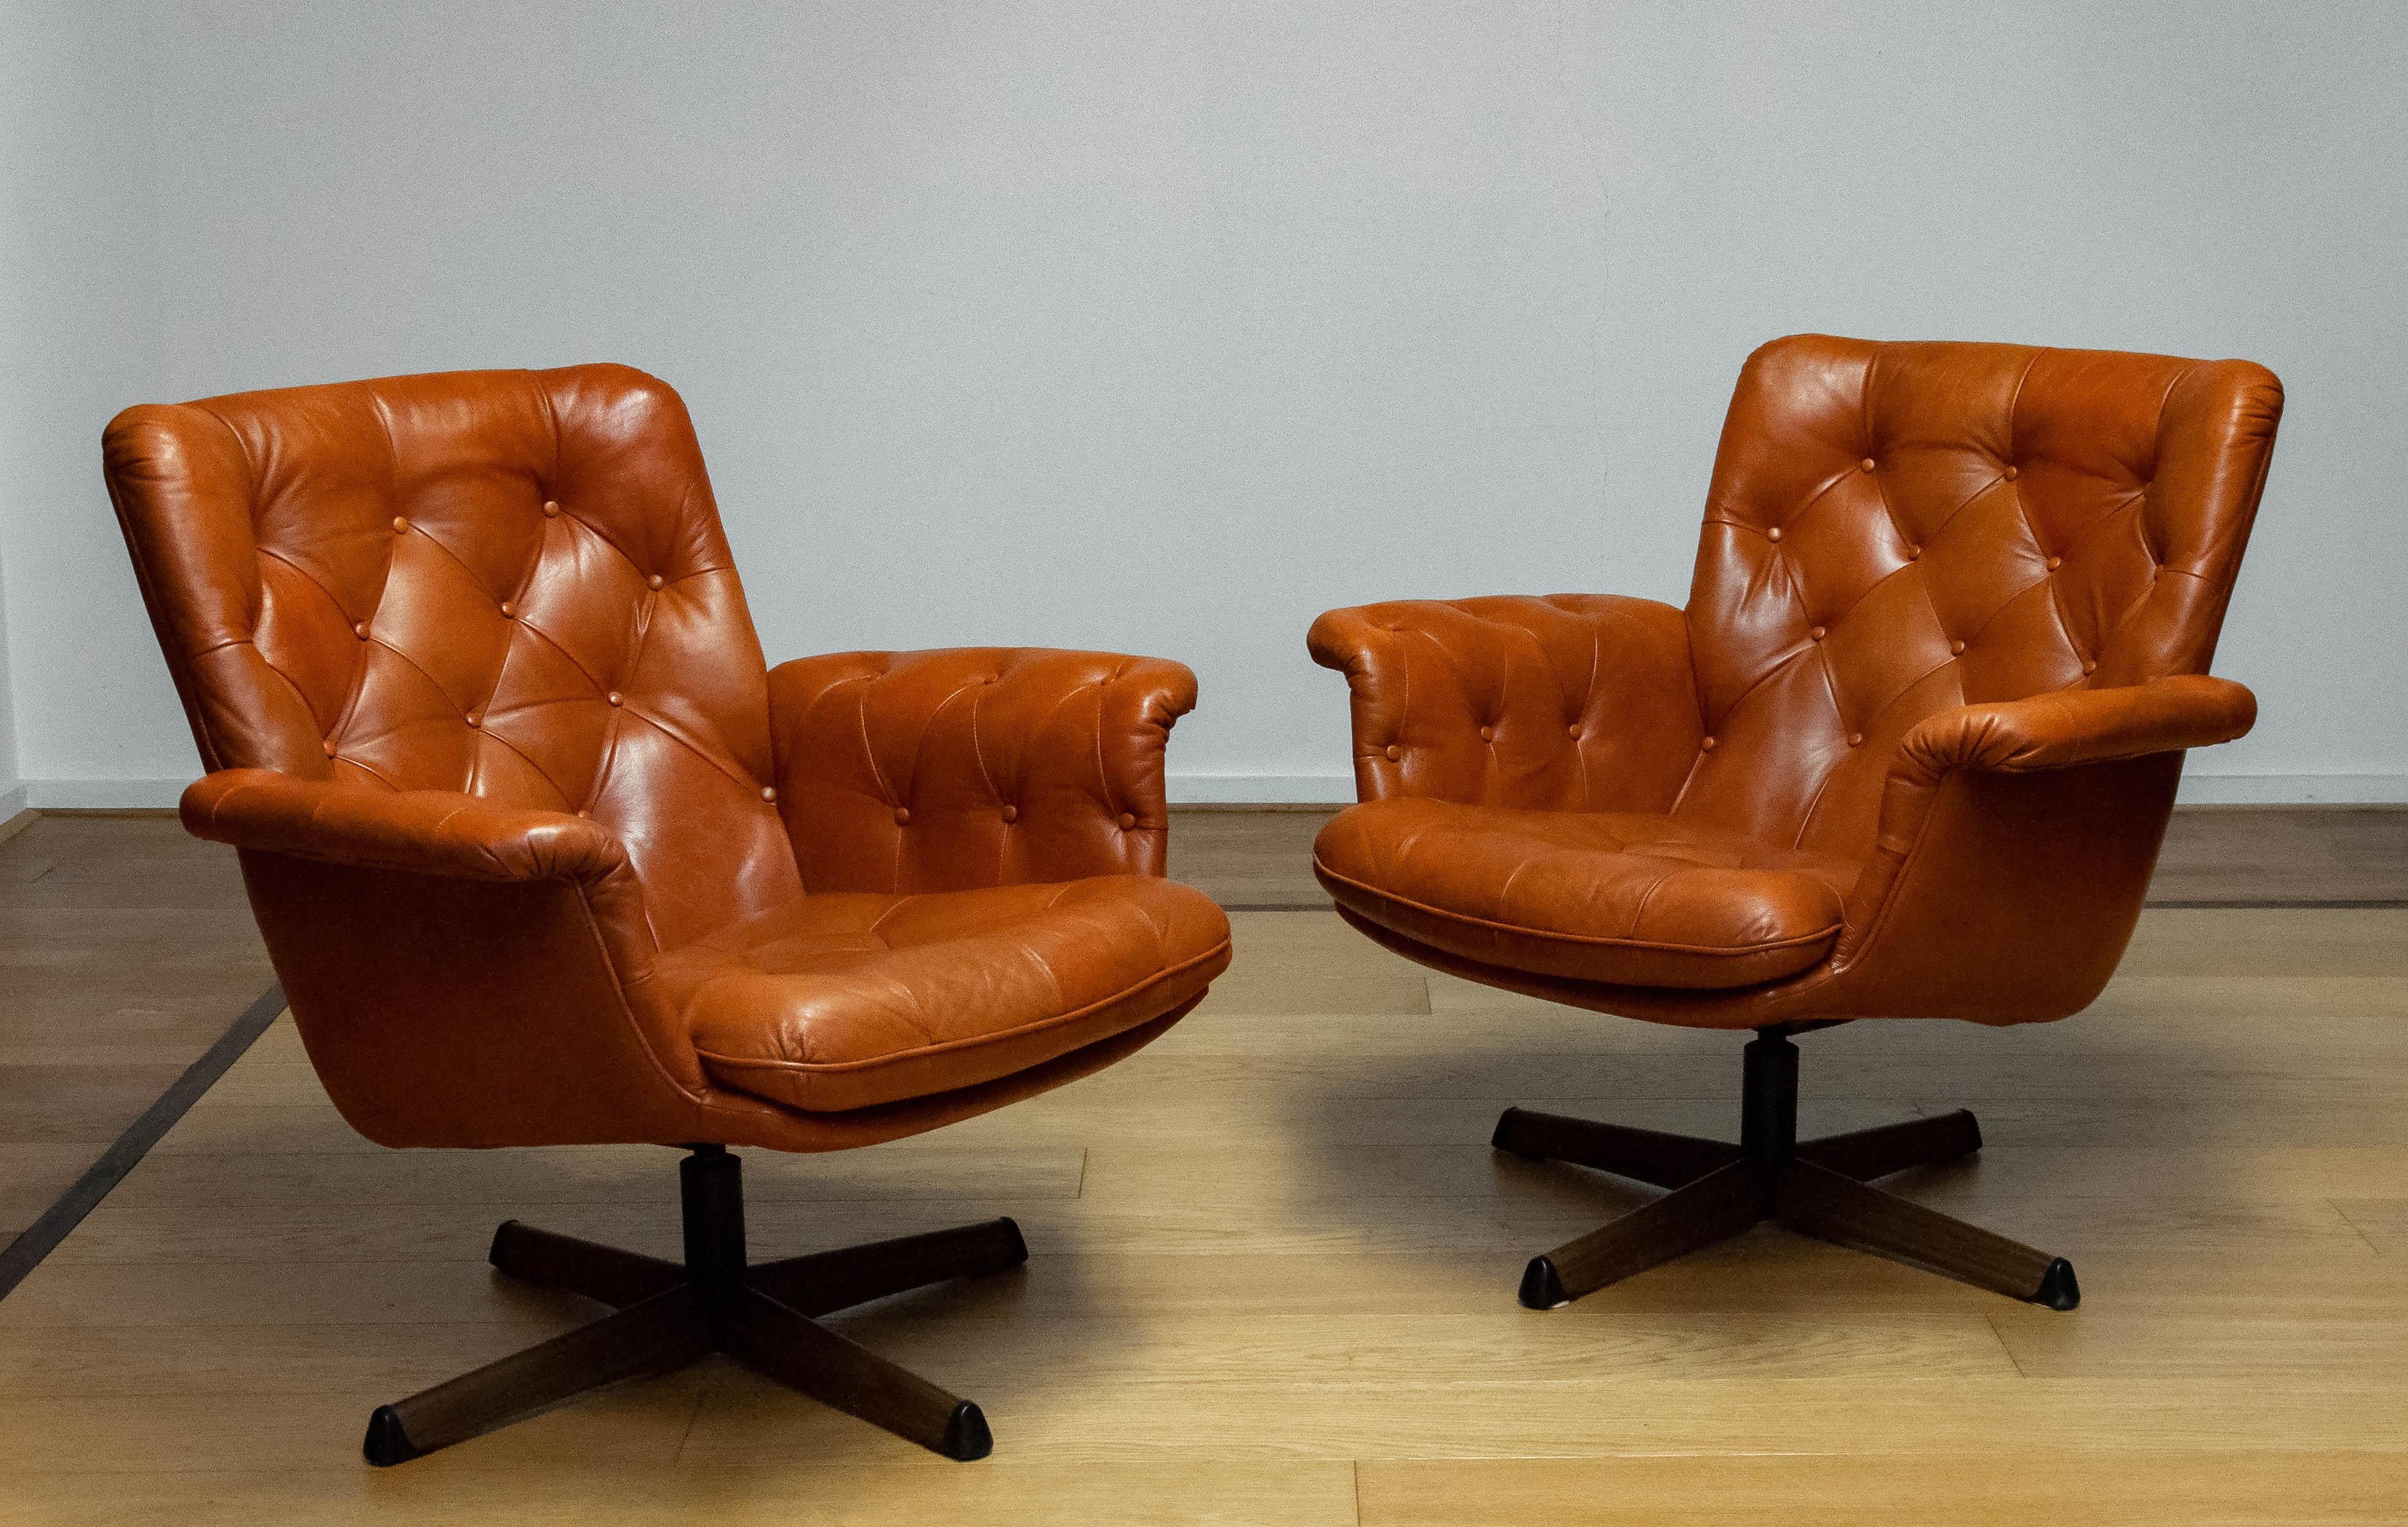 A beautiful pair of swivel chairs made by Göte Möbler Nässjö Sweden , 1960s.
These Chairs are upholstered with tufted cognac leather on a metal with a woodprint swivel stand.
The chairs are very comfortable and they look fantastic in both classic